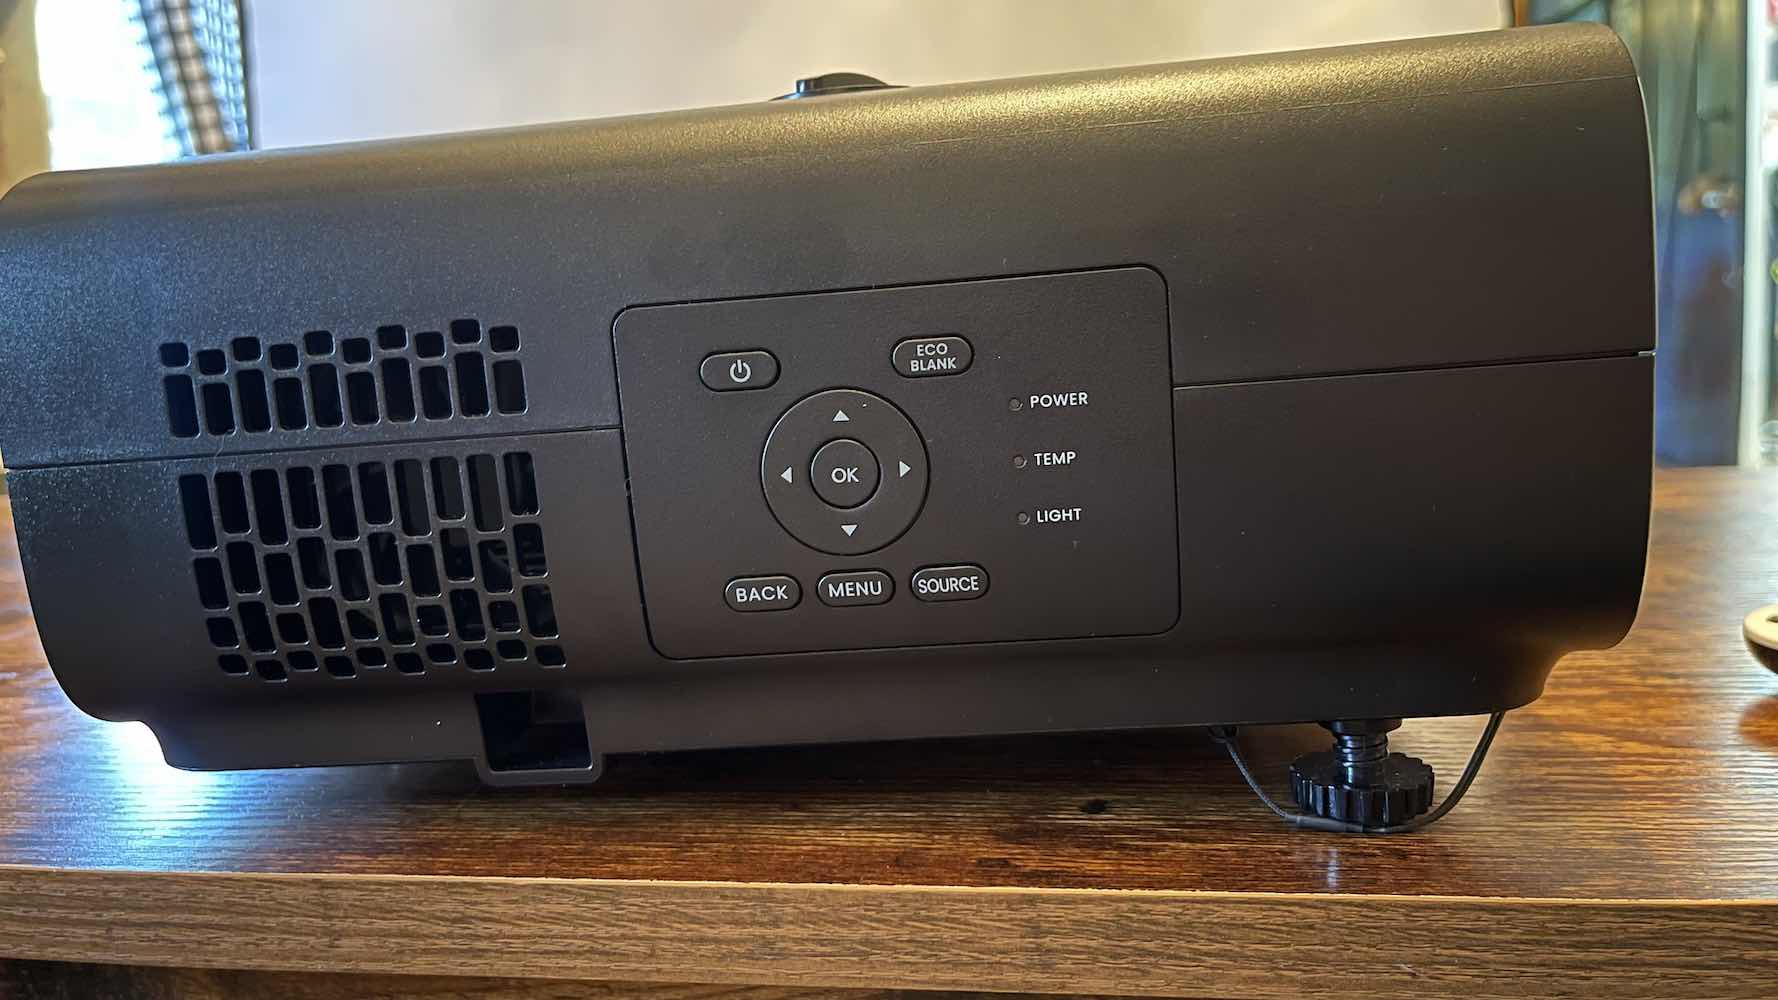 BenQ HT4550i projector review: an out-of-the-box stunner